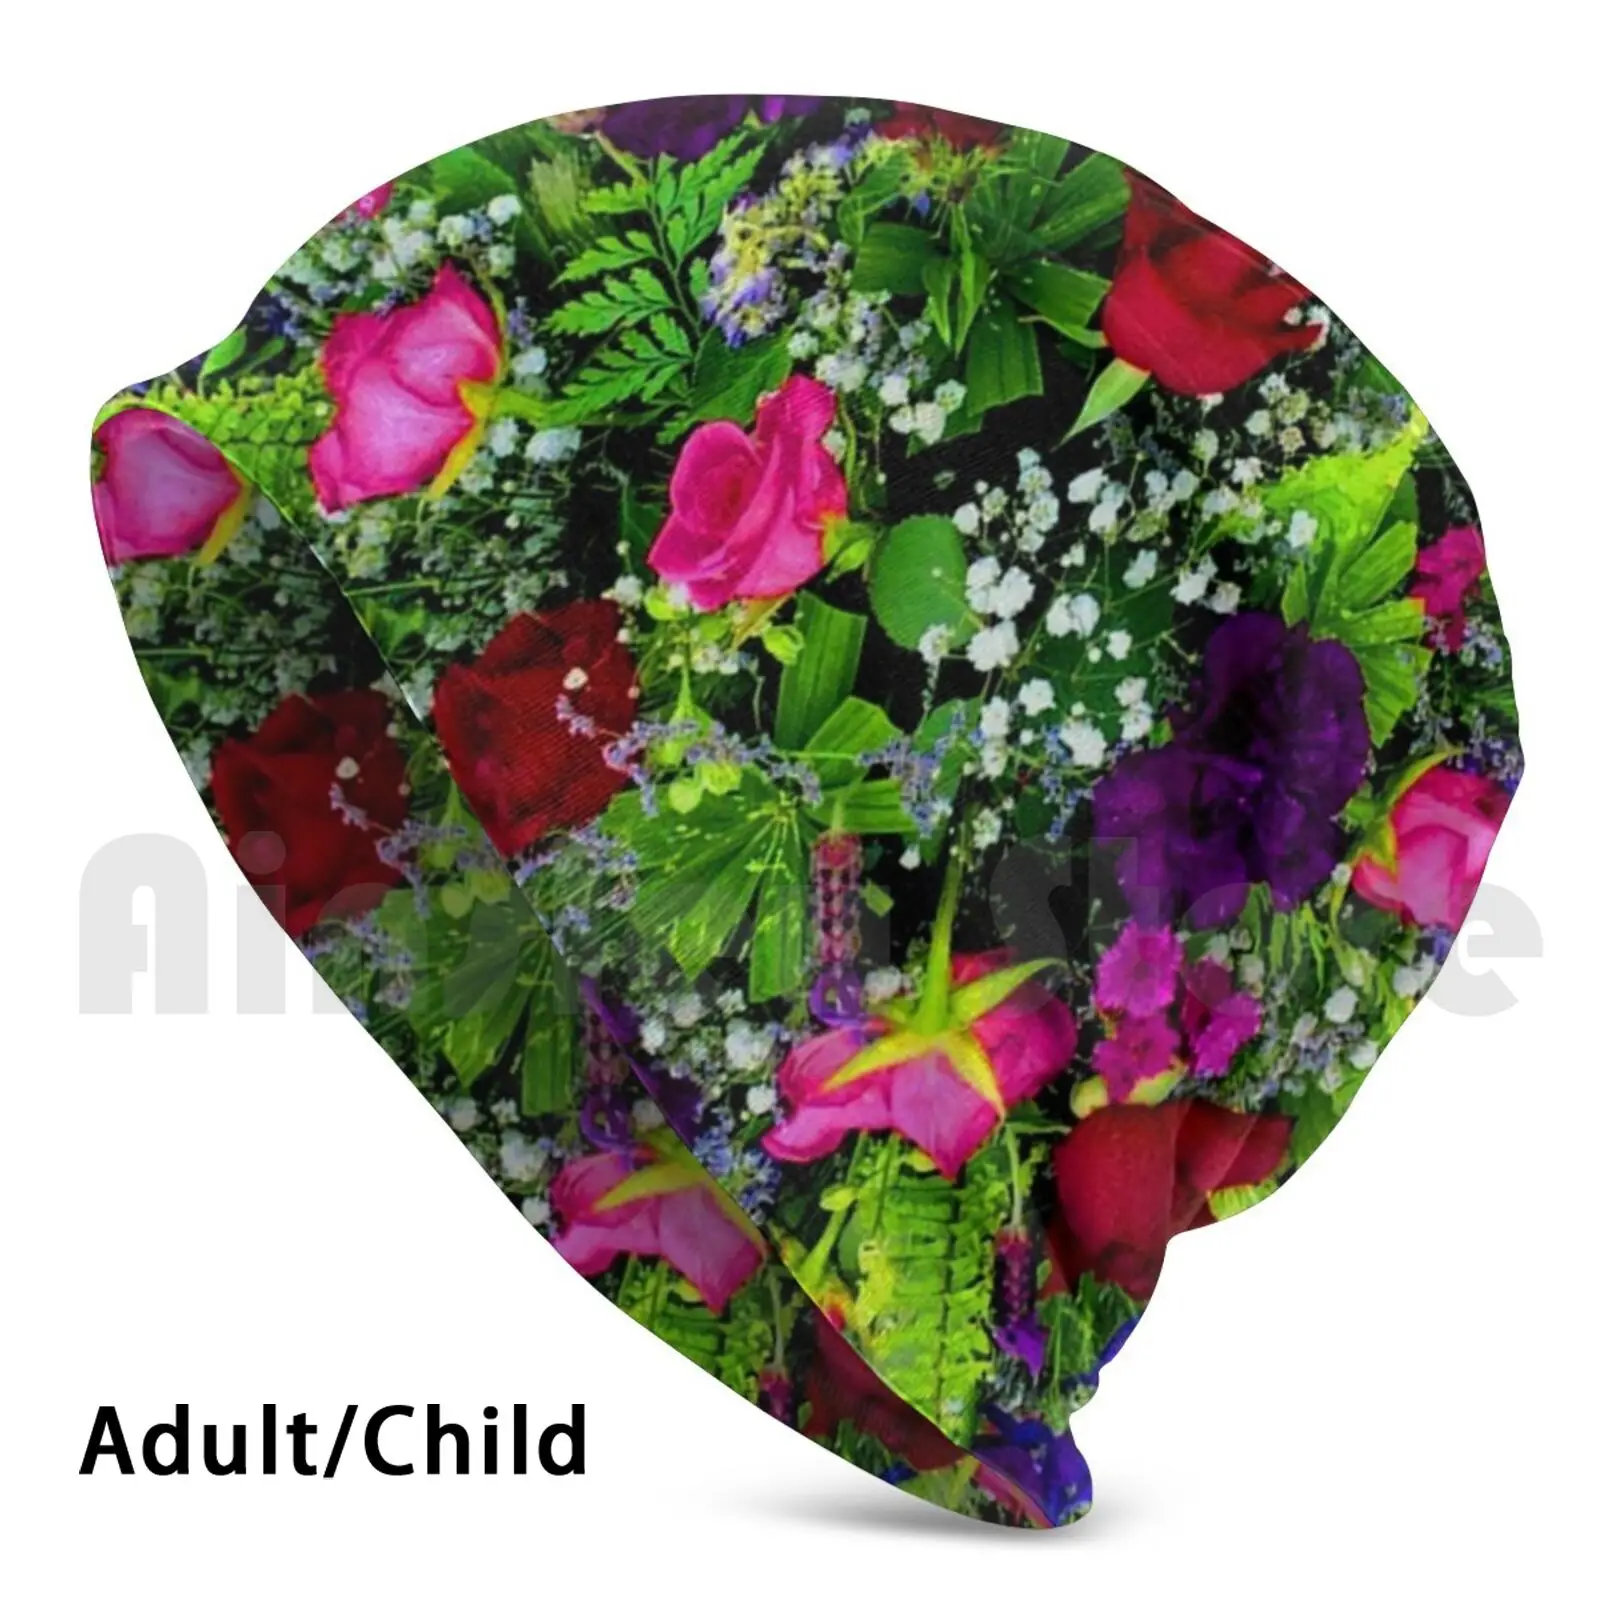 A Brilliant Wreath For A Beautiful Mother Beanies Knit Hat 3001 Beanies Print Wreath Flowers Nature Garden Funeral